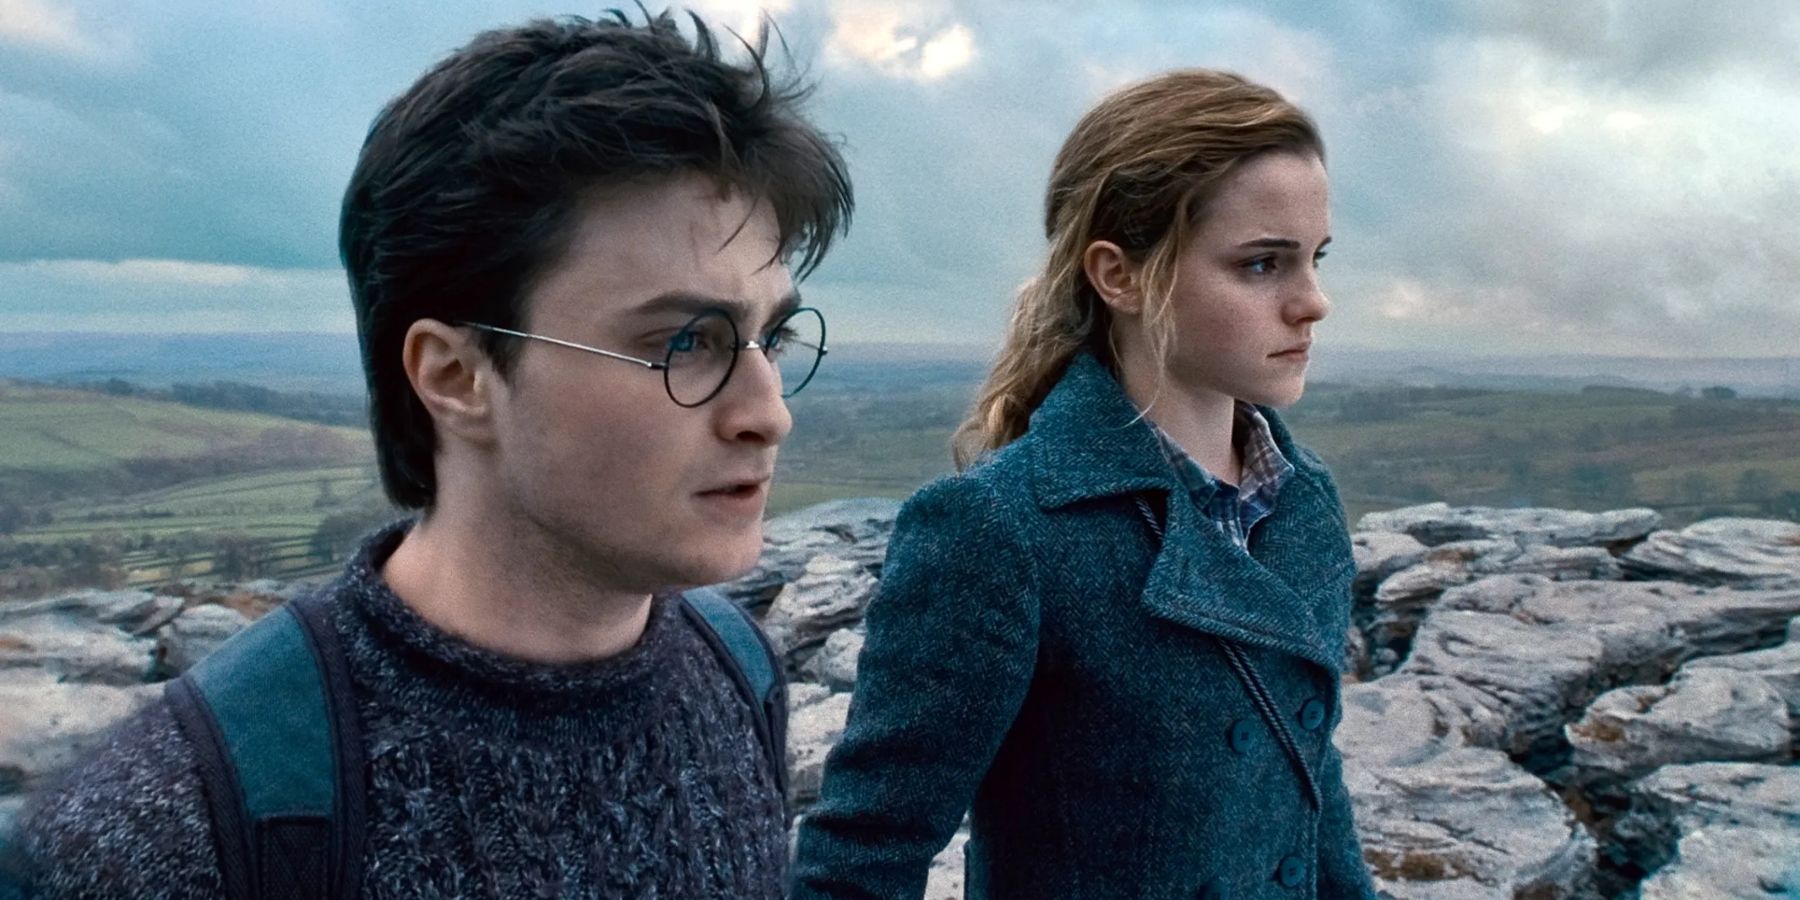 Harry Poter And The Deathly Hallows Part 1_Searching